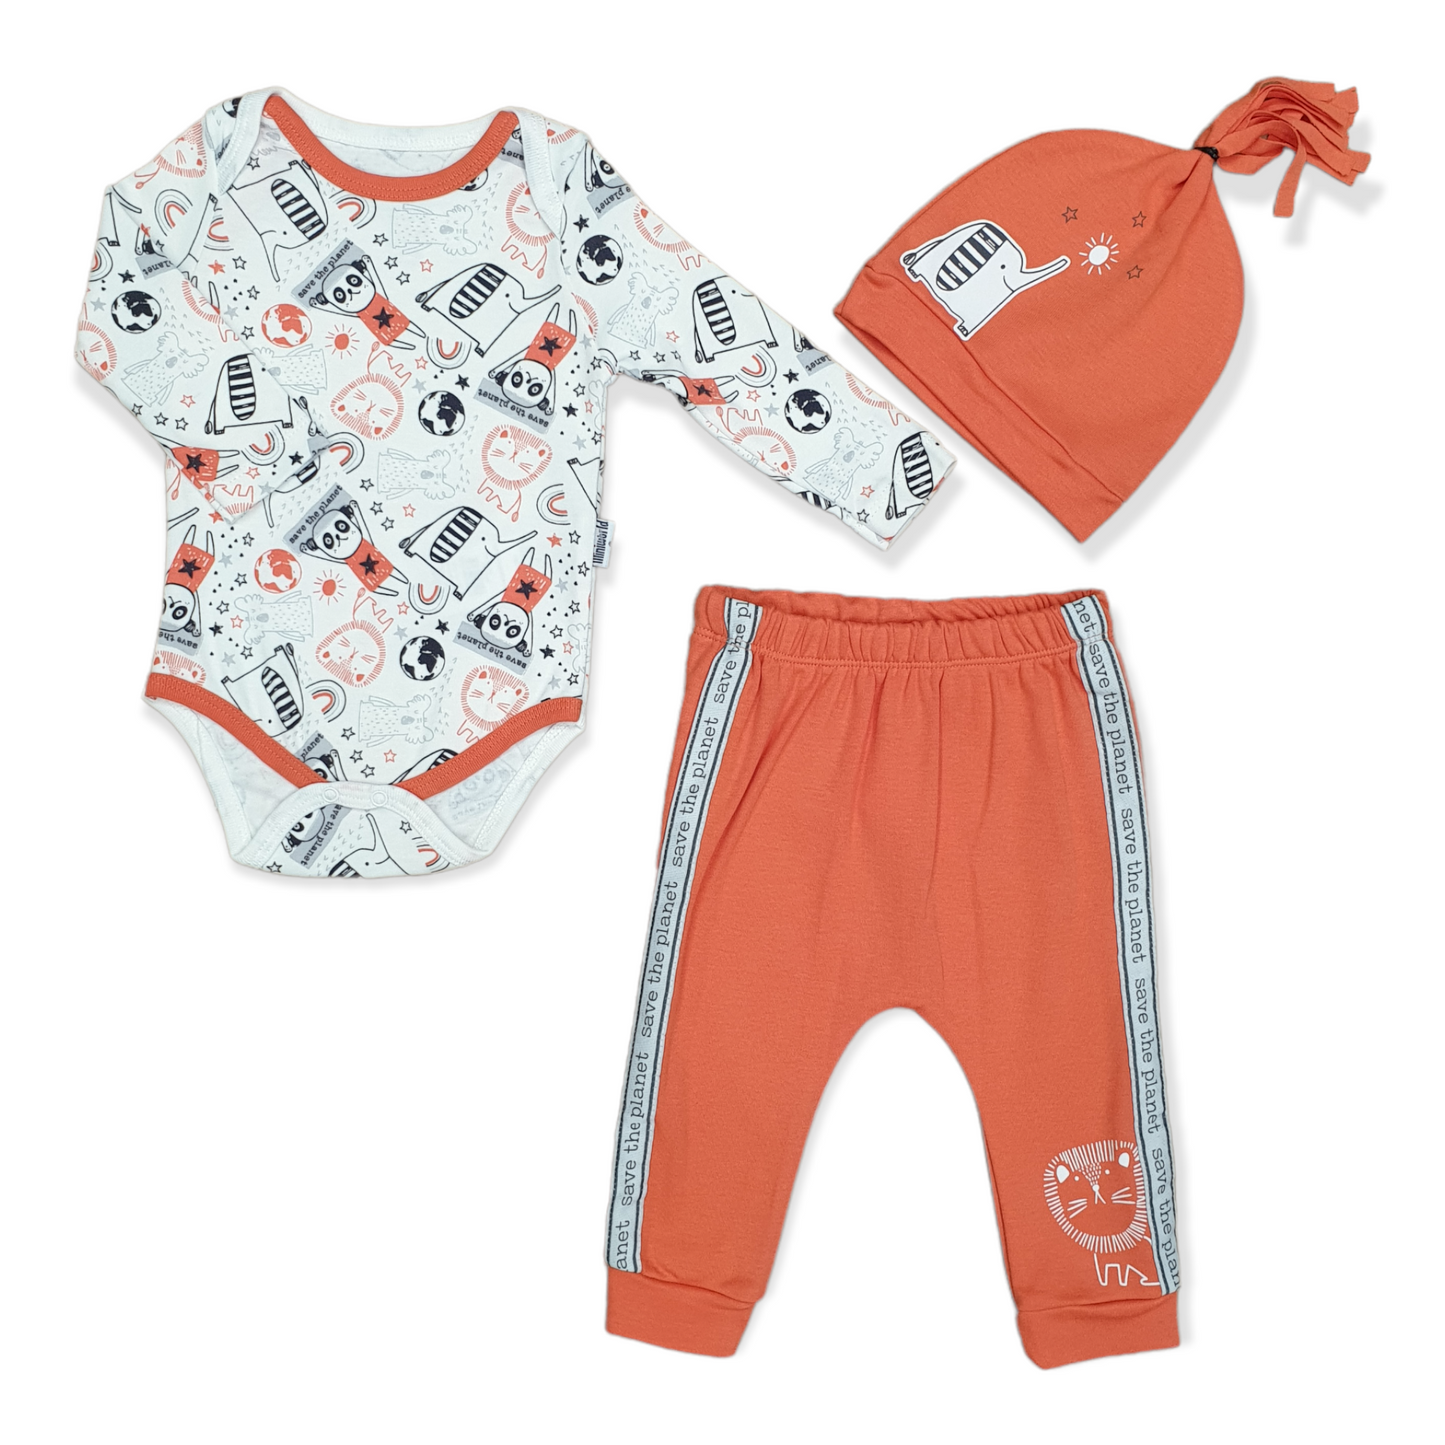 Save The Planet Baby Boy Body with Pants and Cap-Animals, Body, Bodysuit, Boy, Cap, catboy, catset3pcs, Creeper, Earth, Footless, Hat, Long Sleeve, Onesie, Orange, Pants, Planet, Save, White-Miniworld-[Too Twee]-[Tootwee]-[baby]-[newborn]-[clothes]-[essentials]-[toys]-[Lebanon]